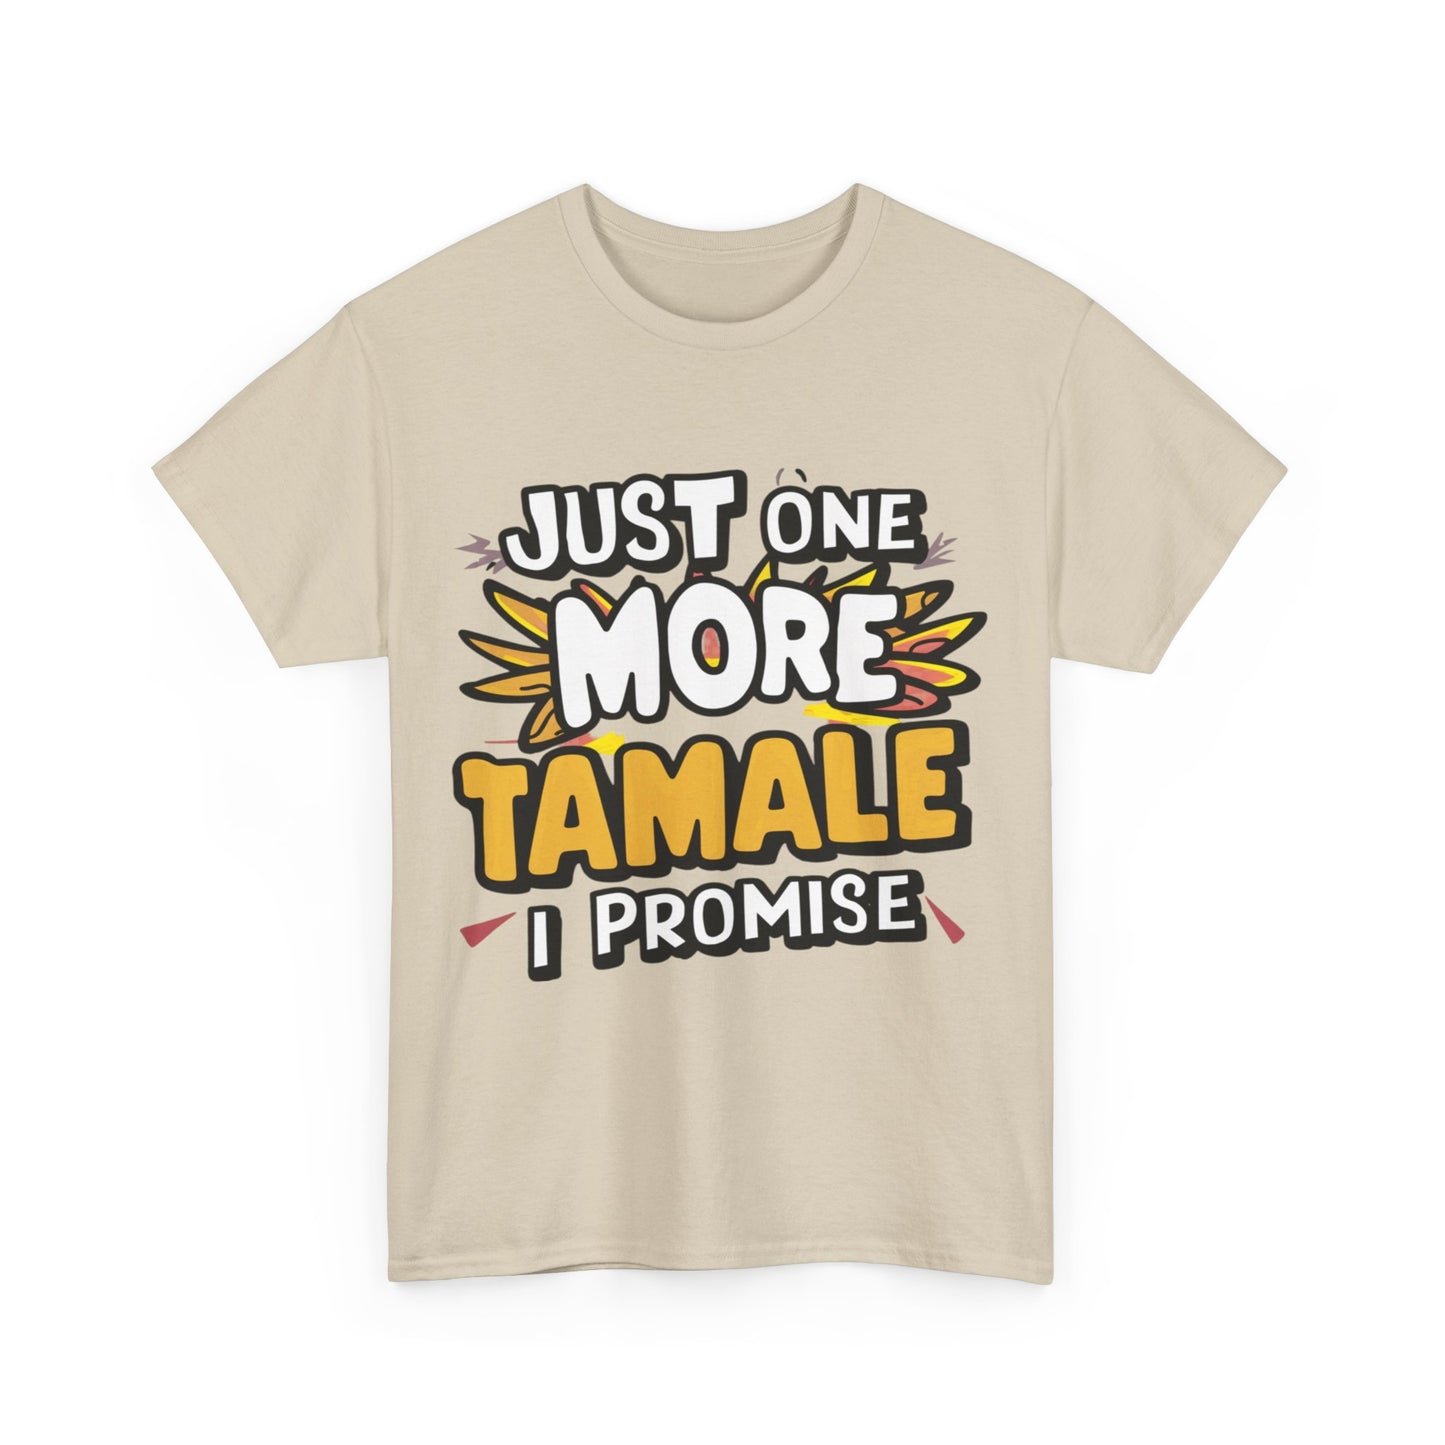 Just One More Tamale I Promise Mexican Food Graphic Unisex Heavy Cotton Tee Cotton Funny Humorous Graphic Soft Premium Unisex Men Women Sand T-shirt Birthday Gift-36